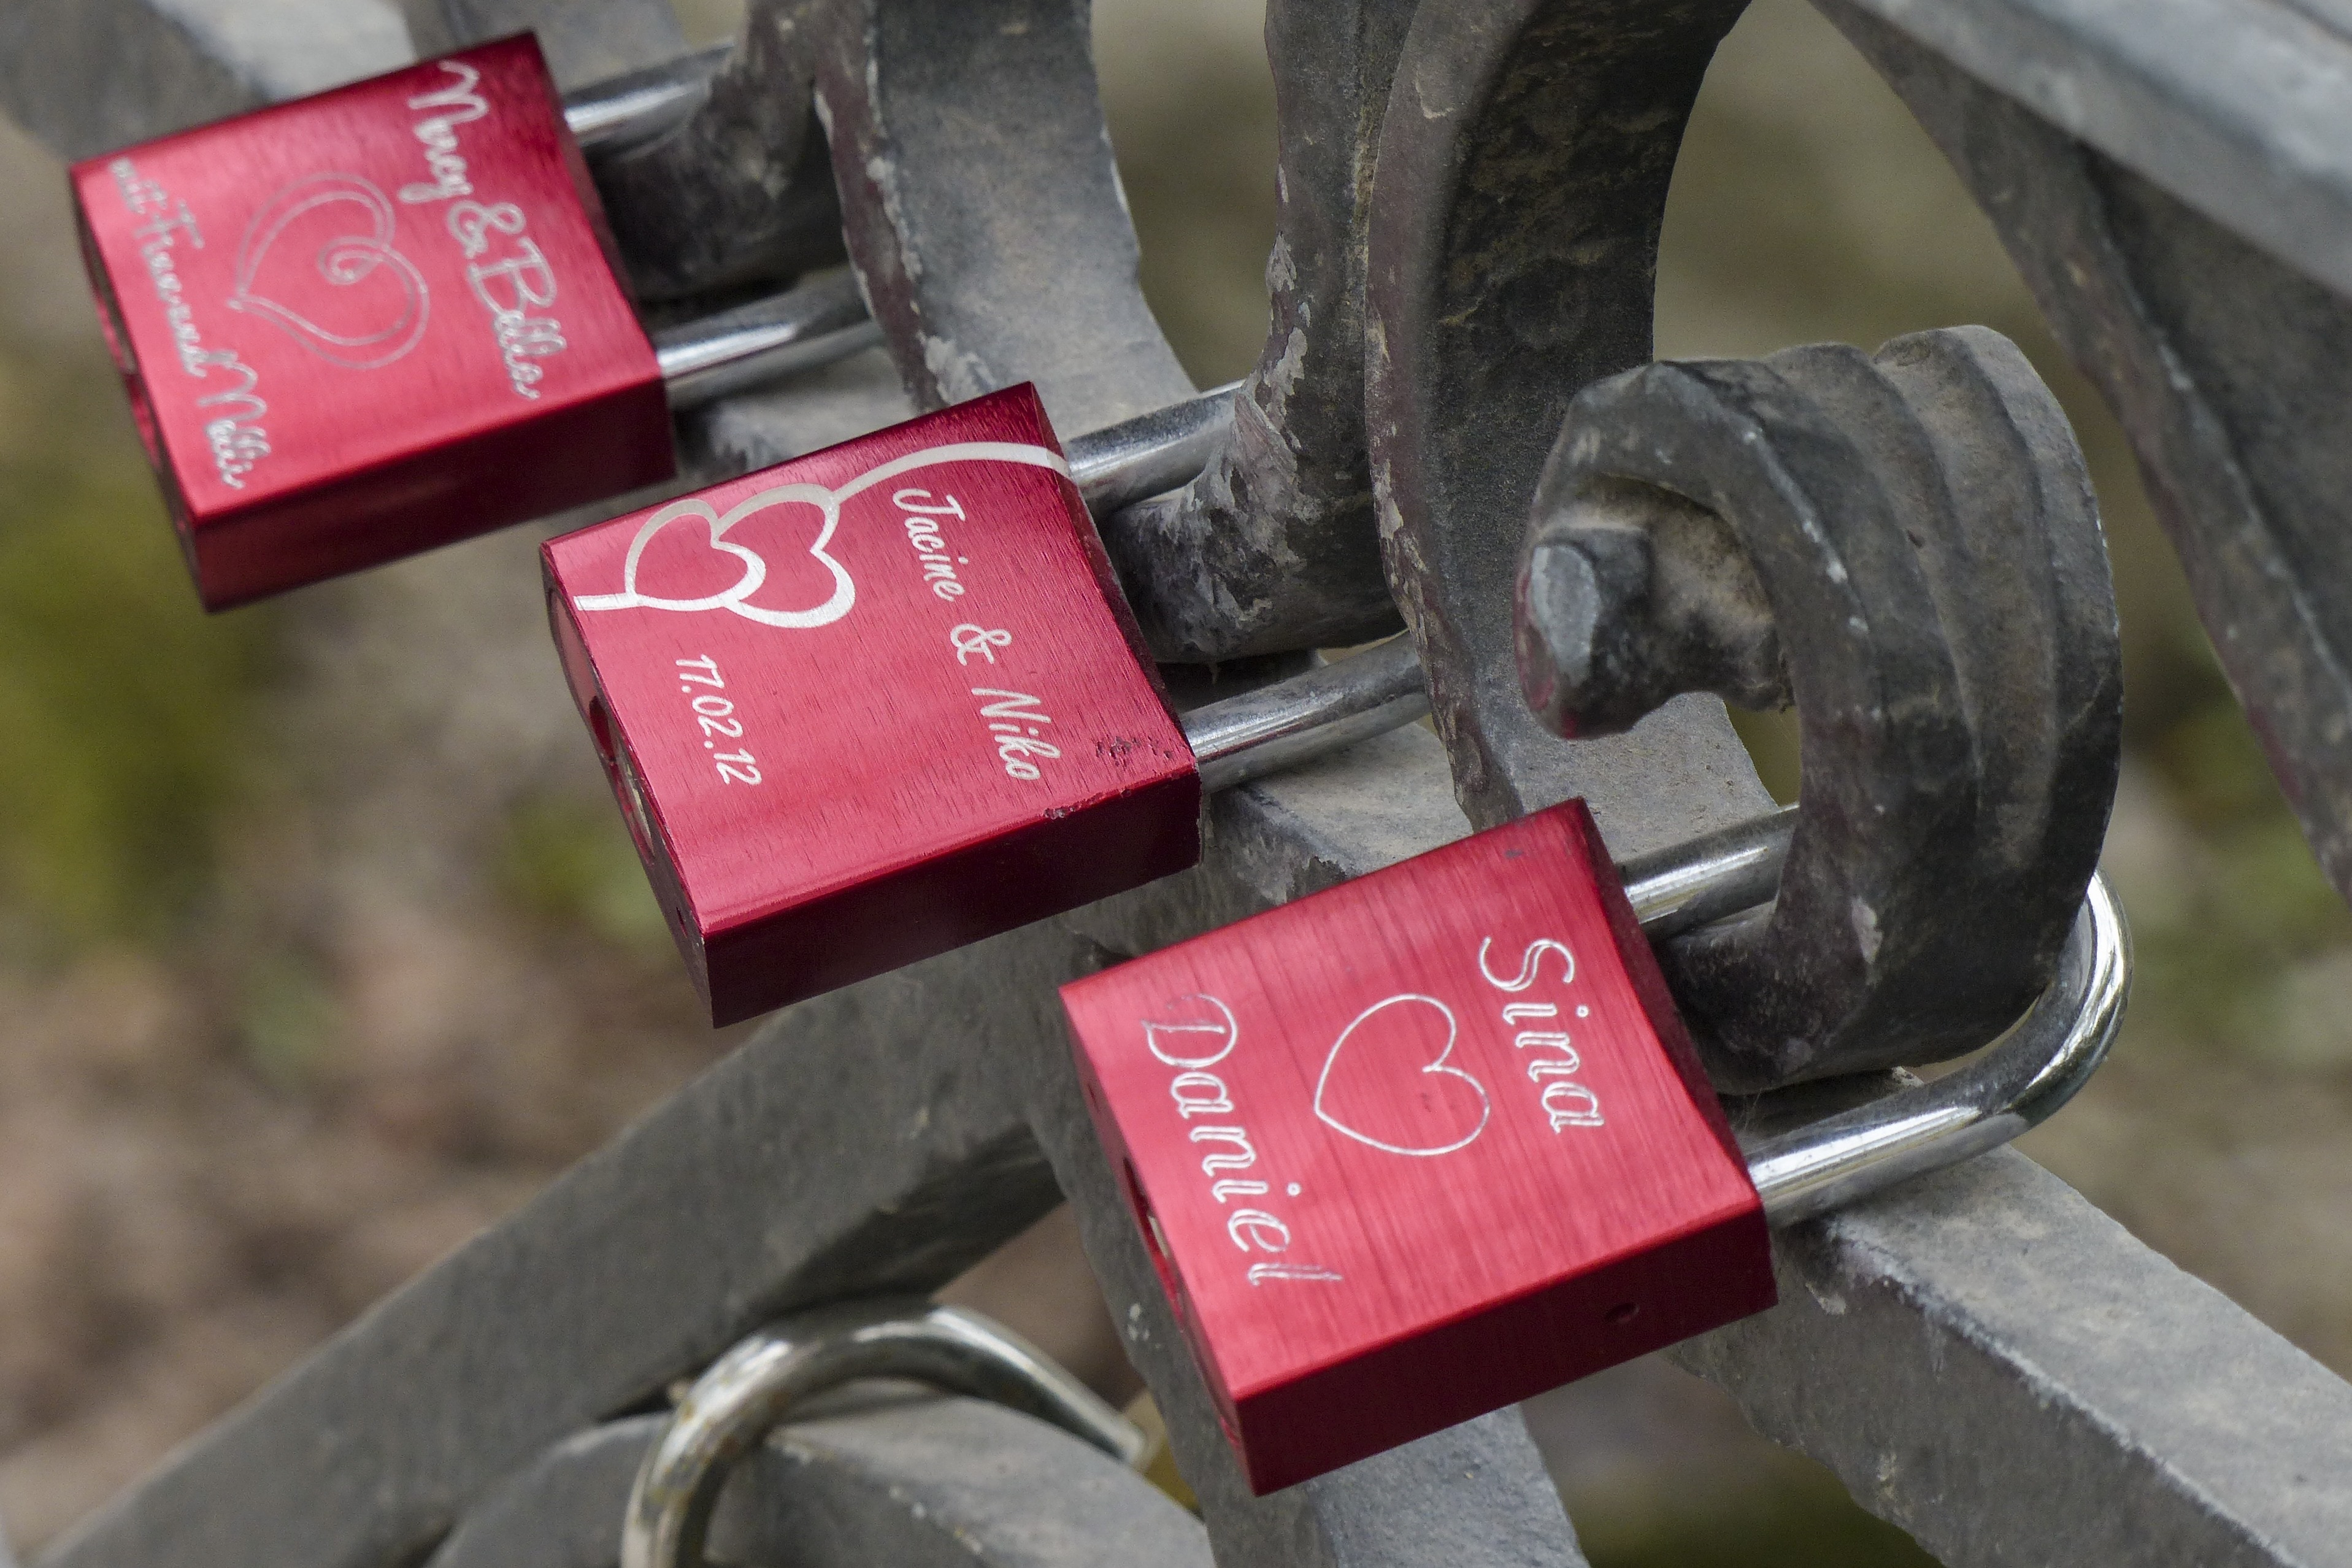 3 red and silver padlocks